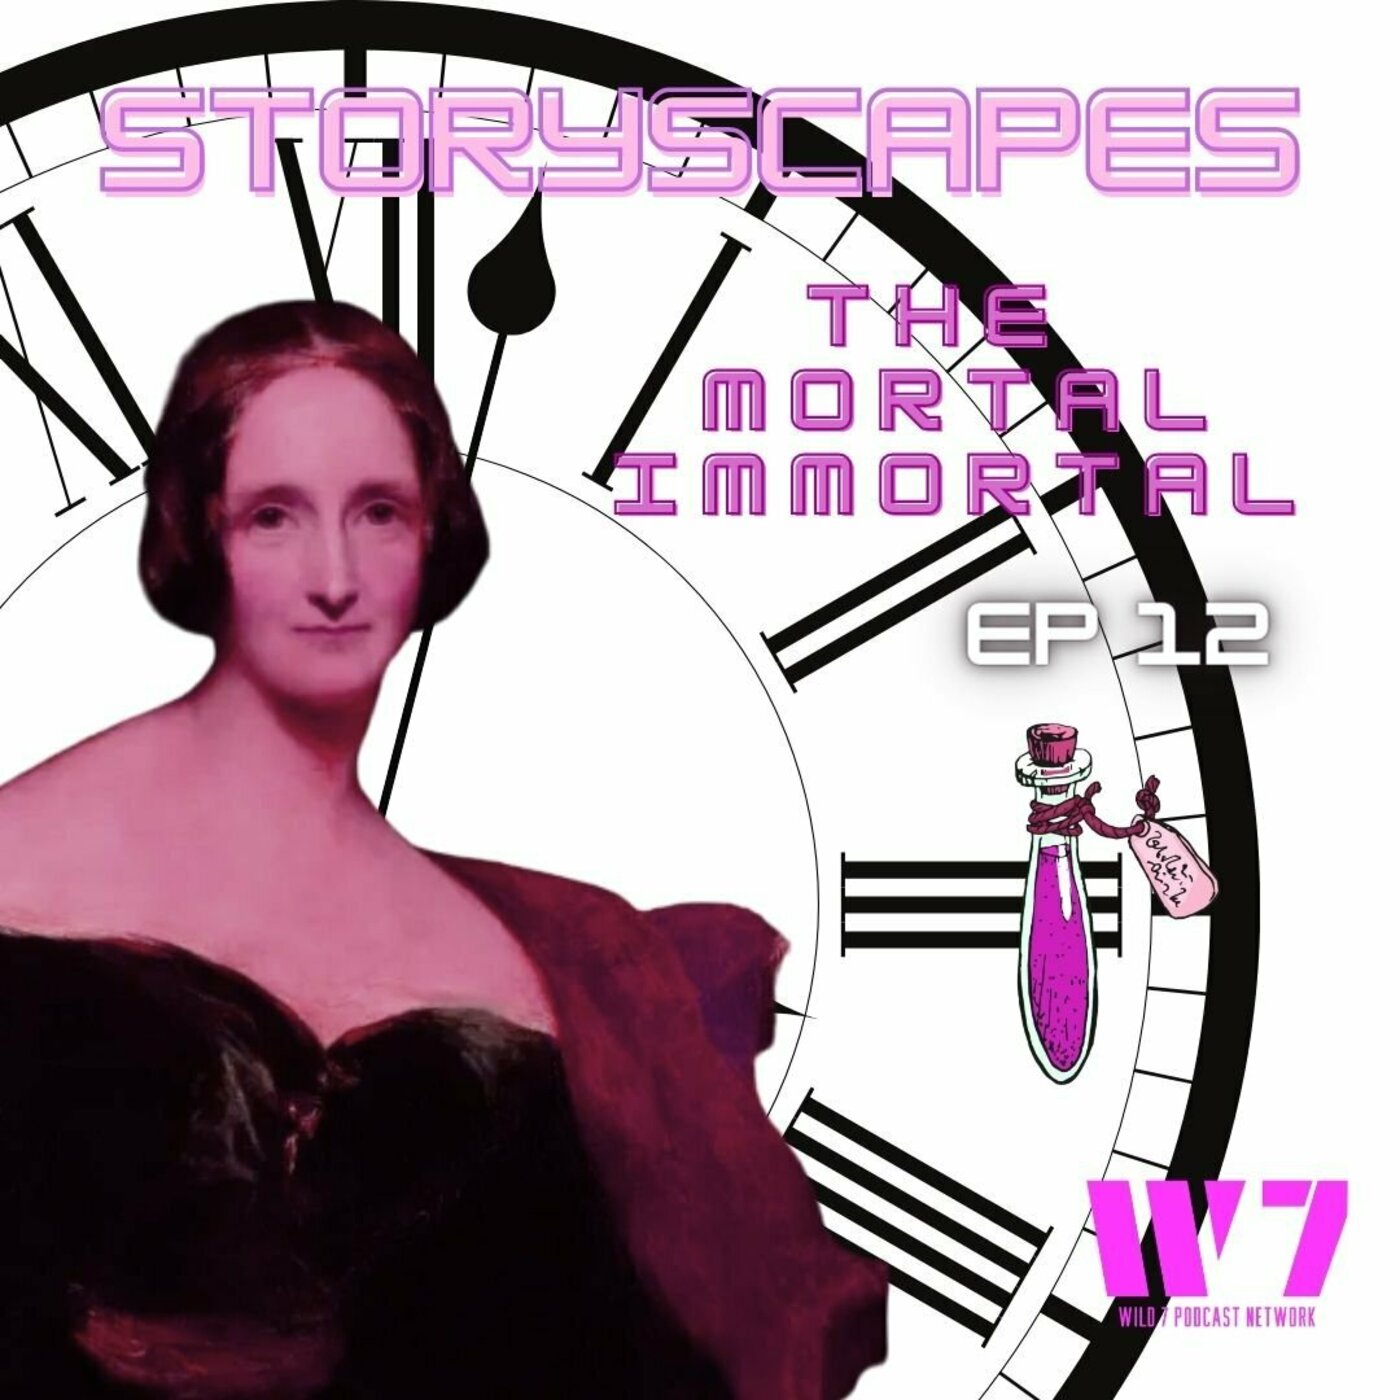 Episode 12 - The Mortal Immortal - by Mary Shelley - STORYSCAPES